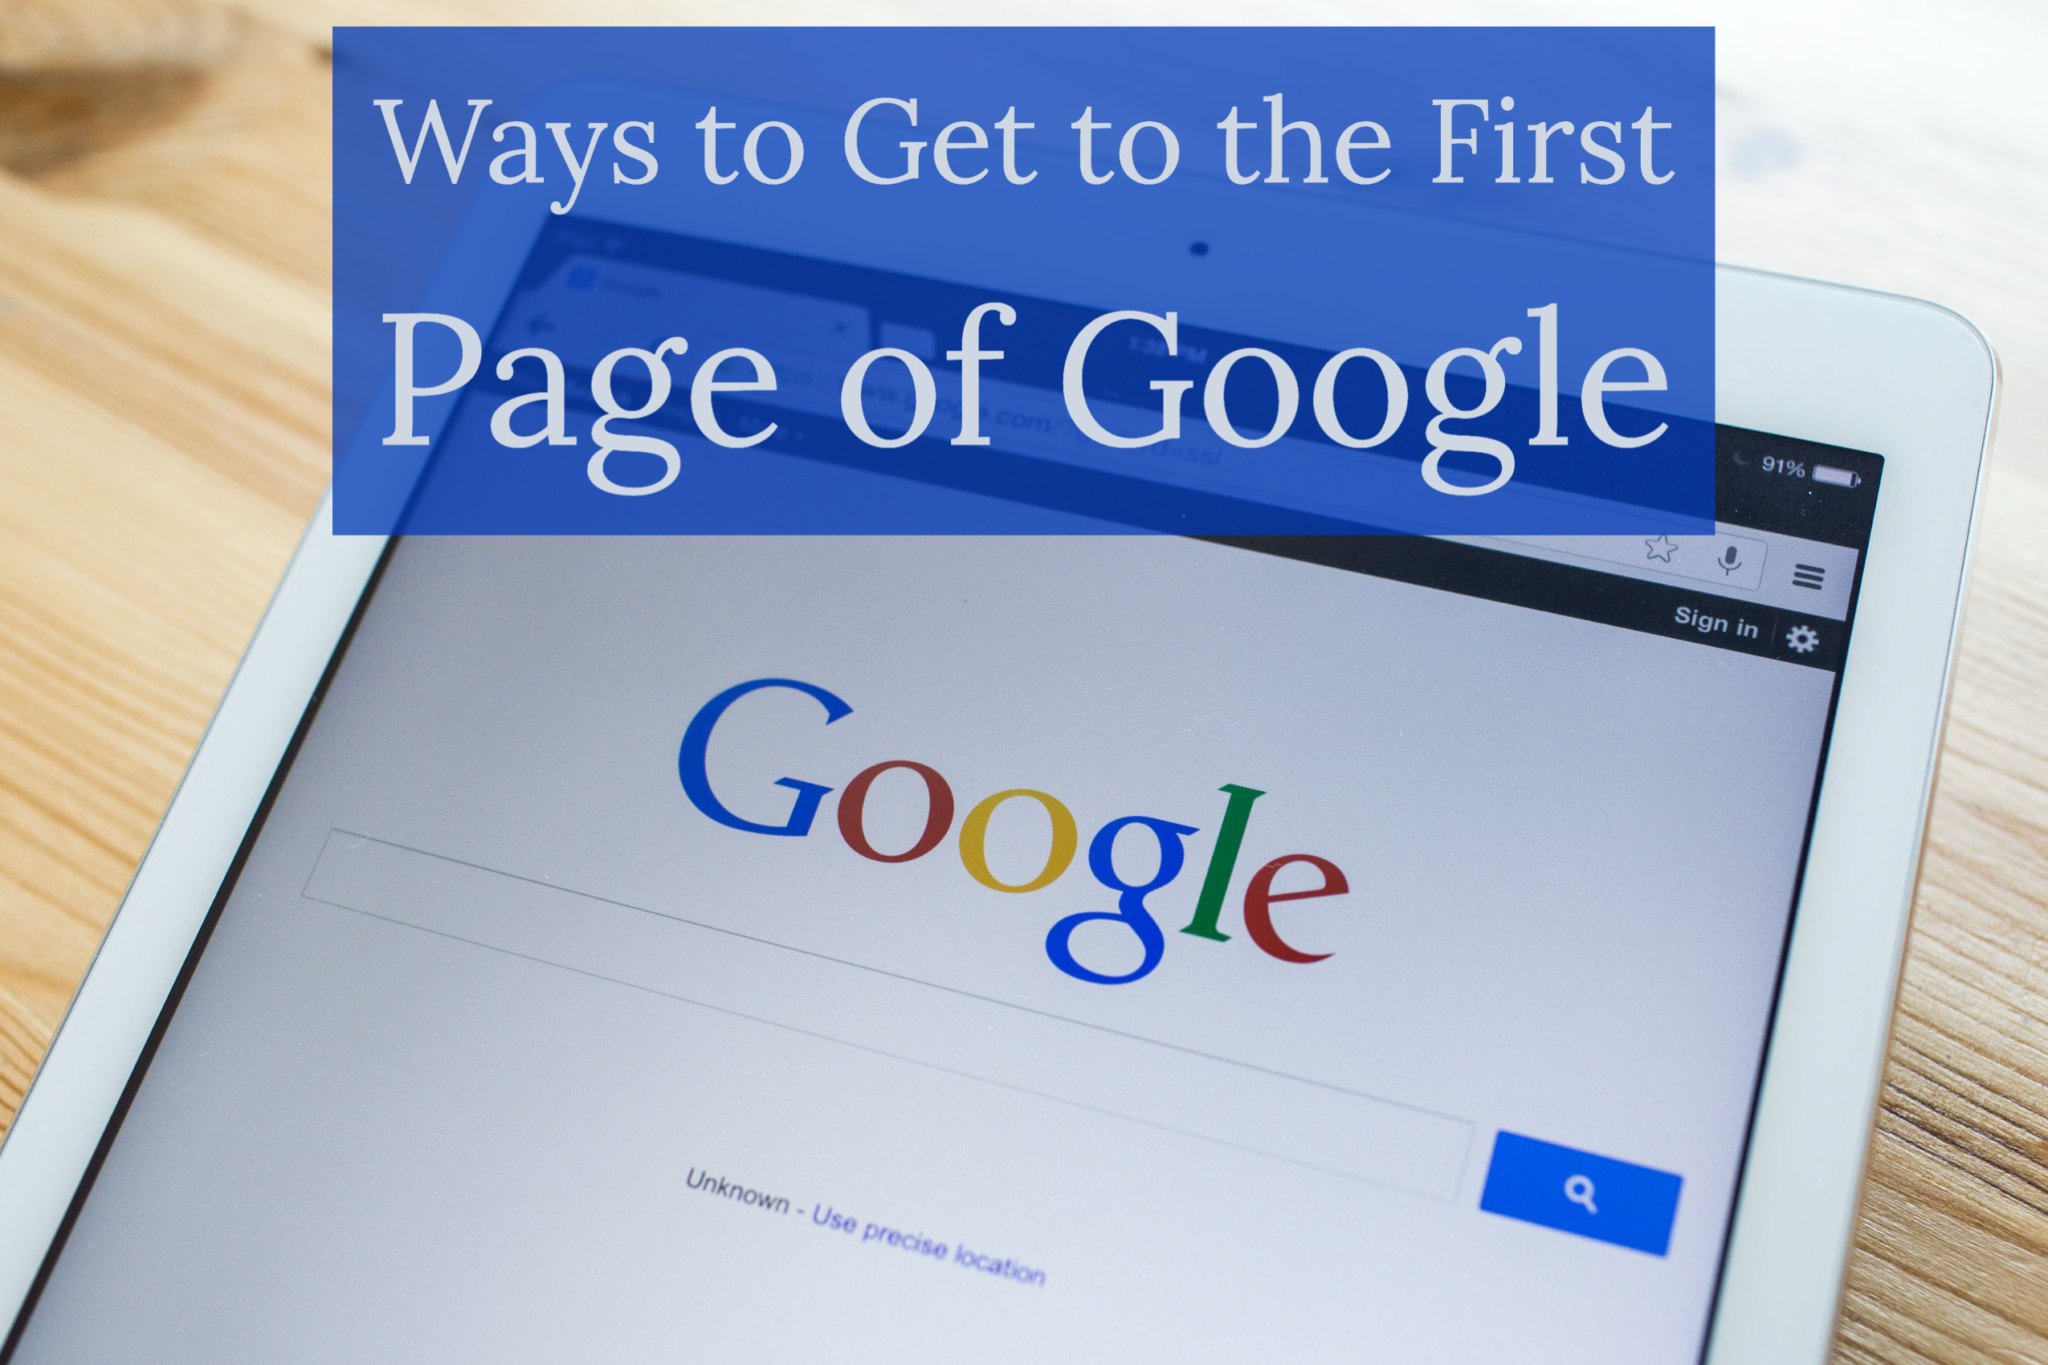 Ways to Get to the First Page of Google